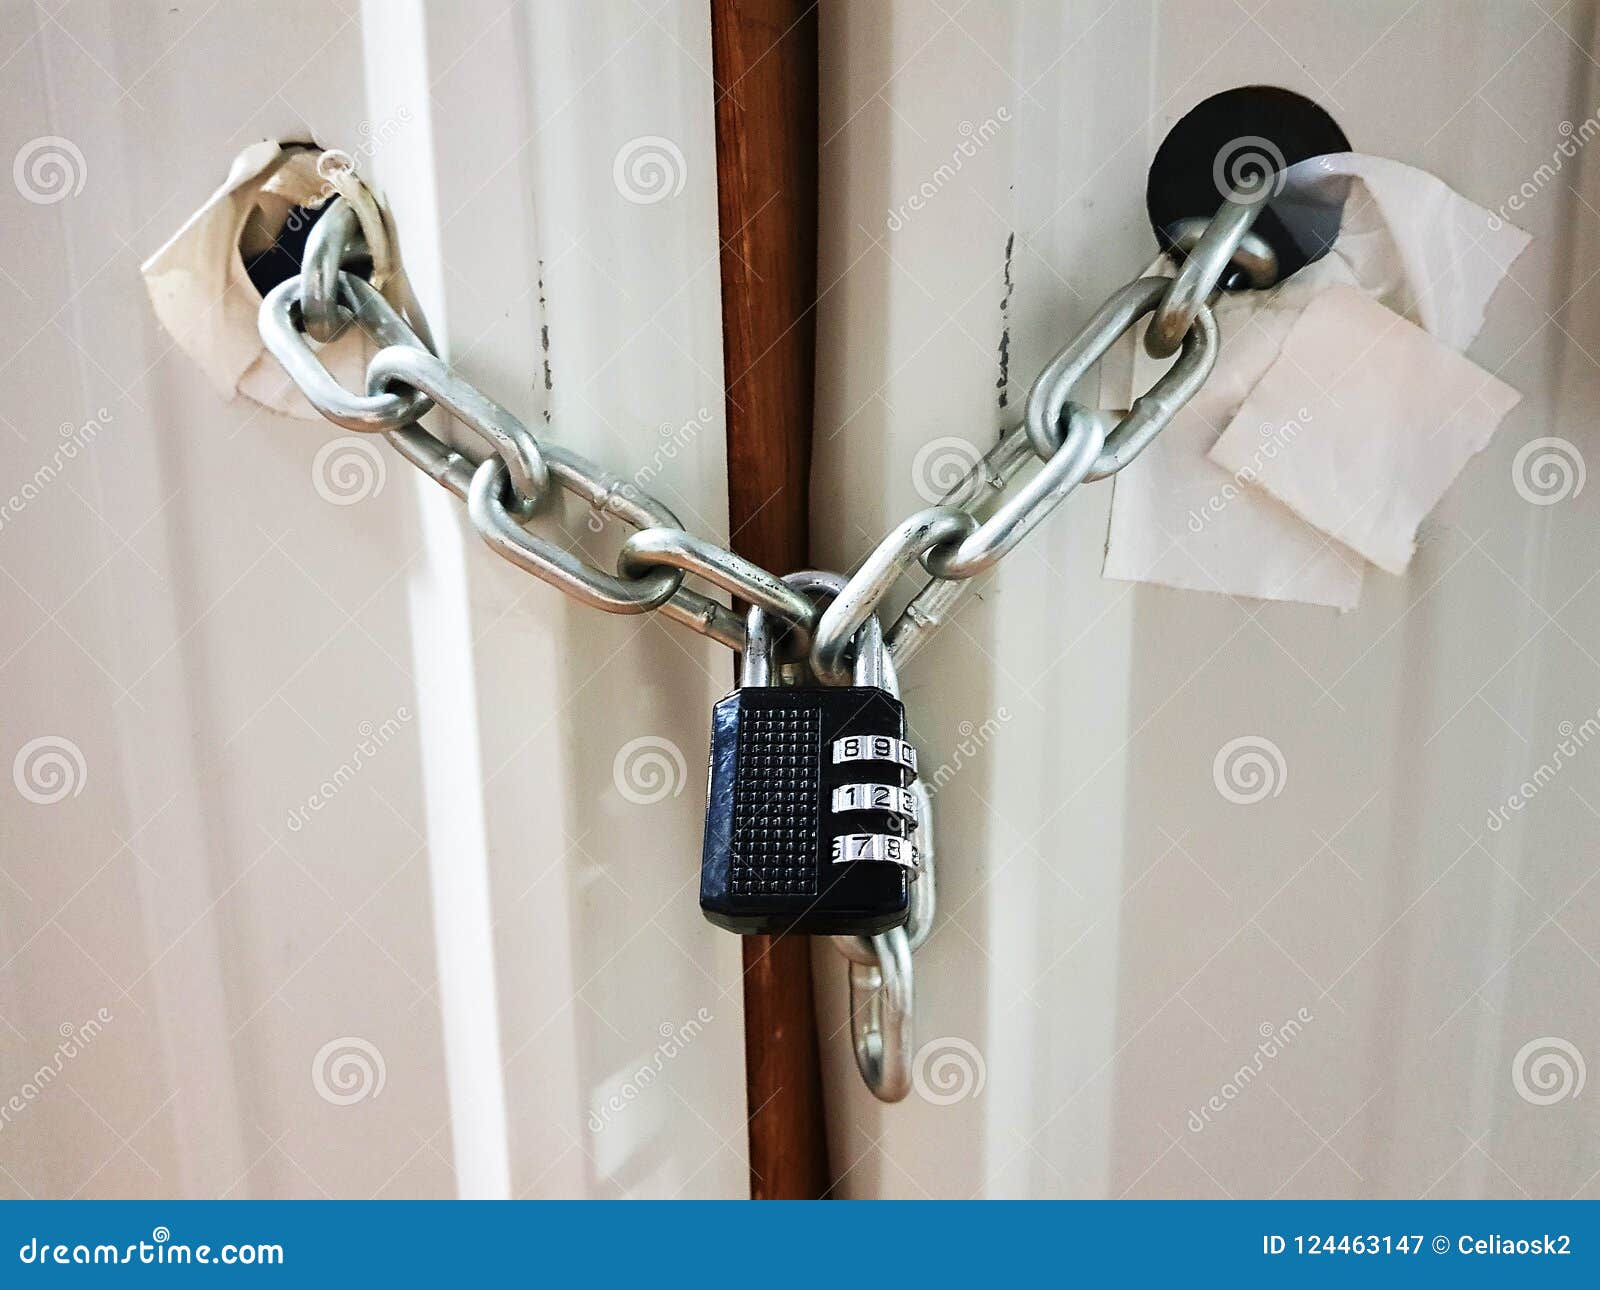 chain number lock